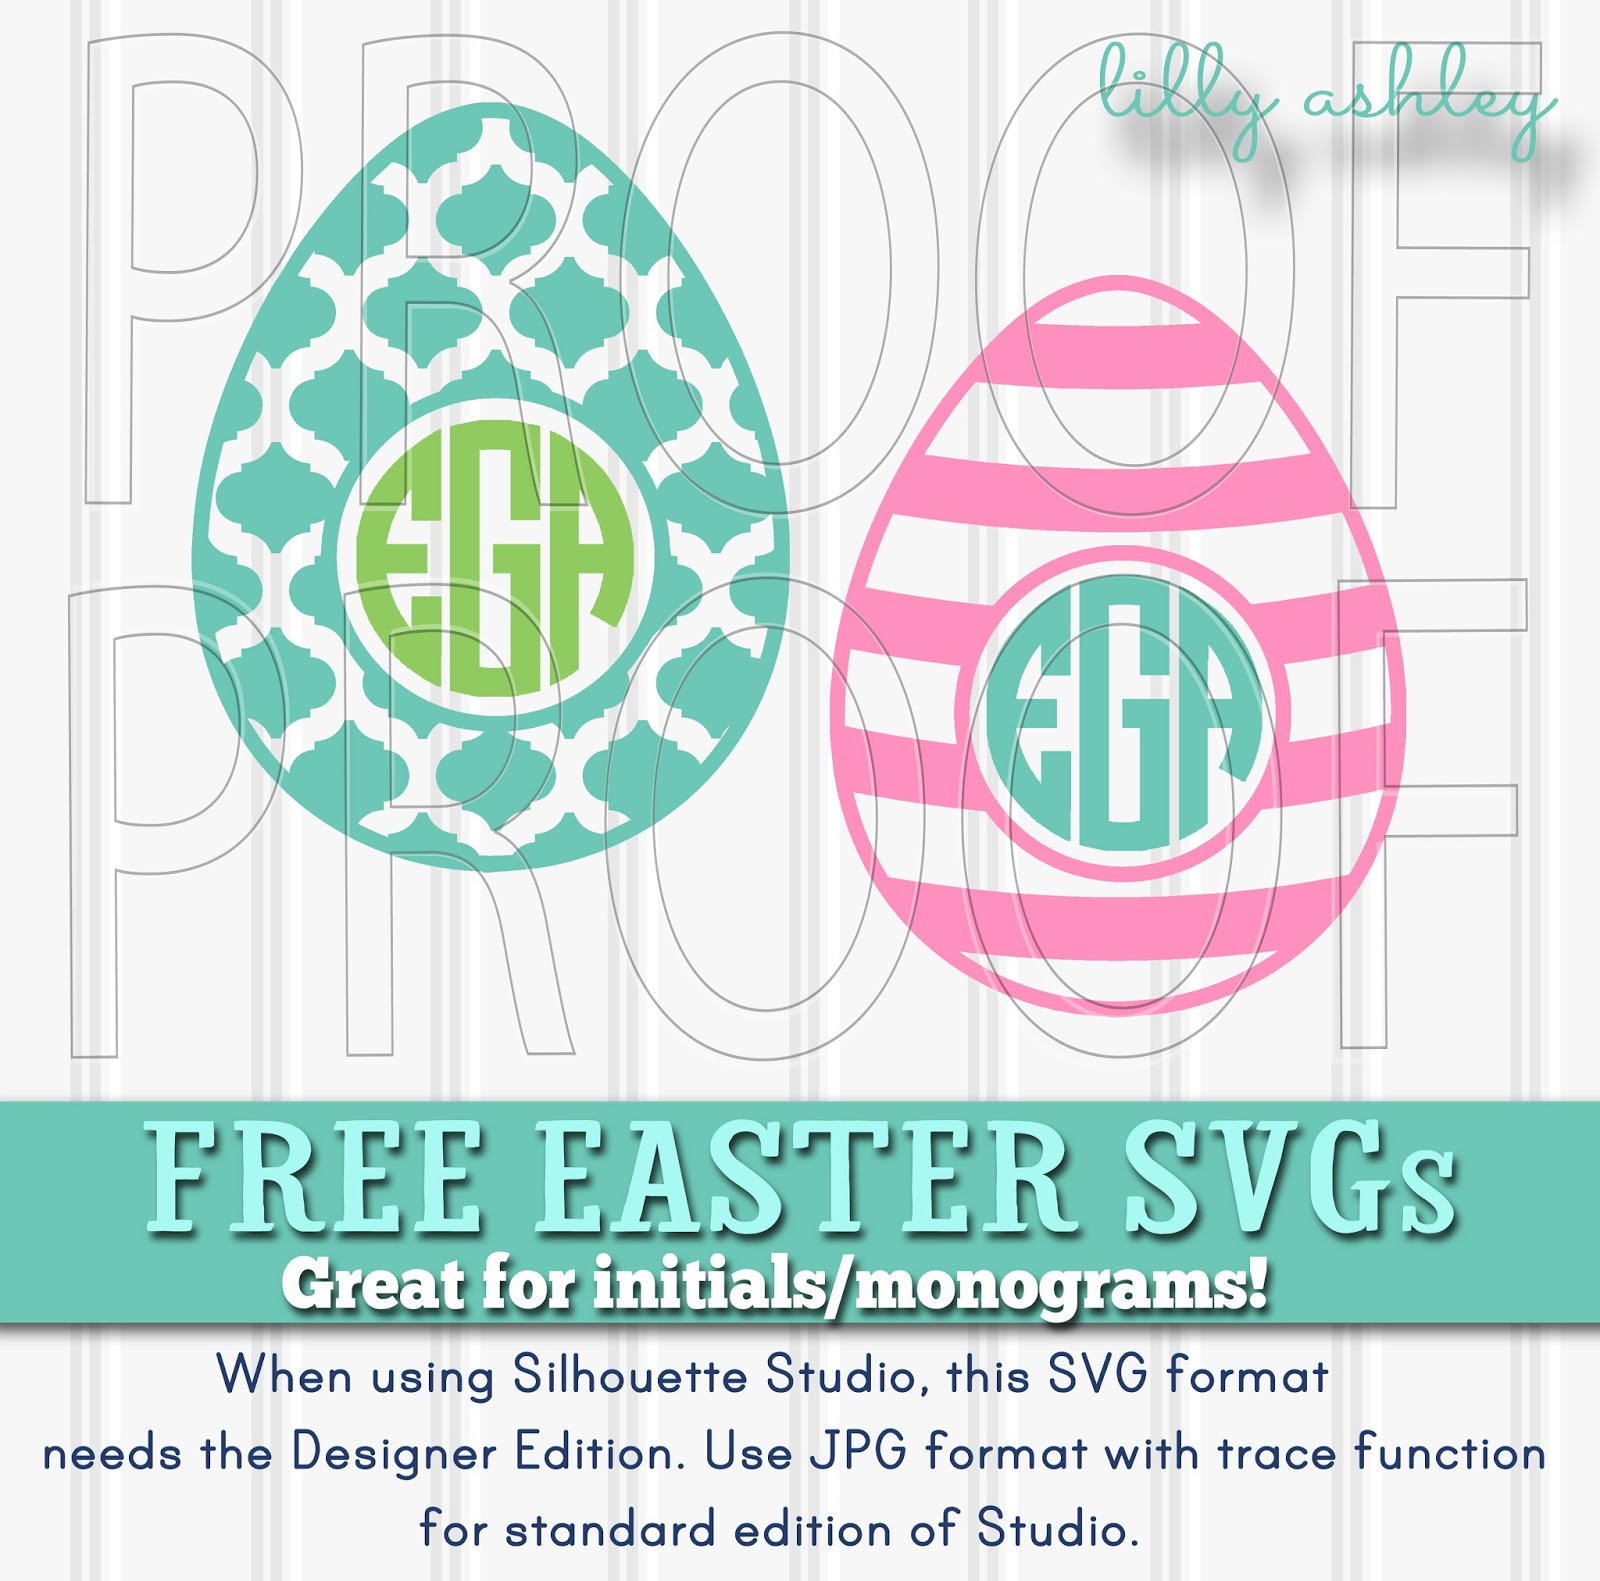 Download Make it Create...Free Cut Files and Printables: Free Easter SVG Files